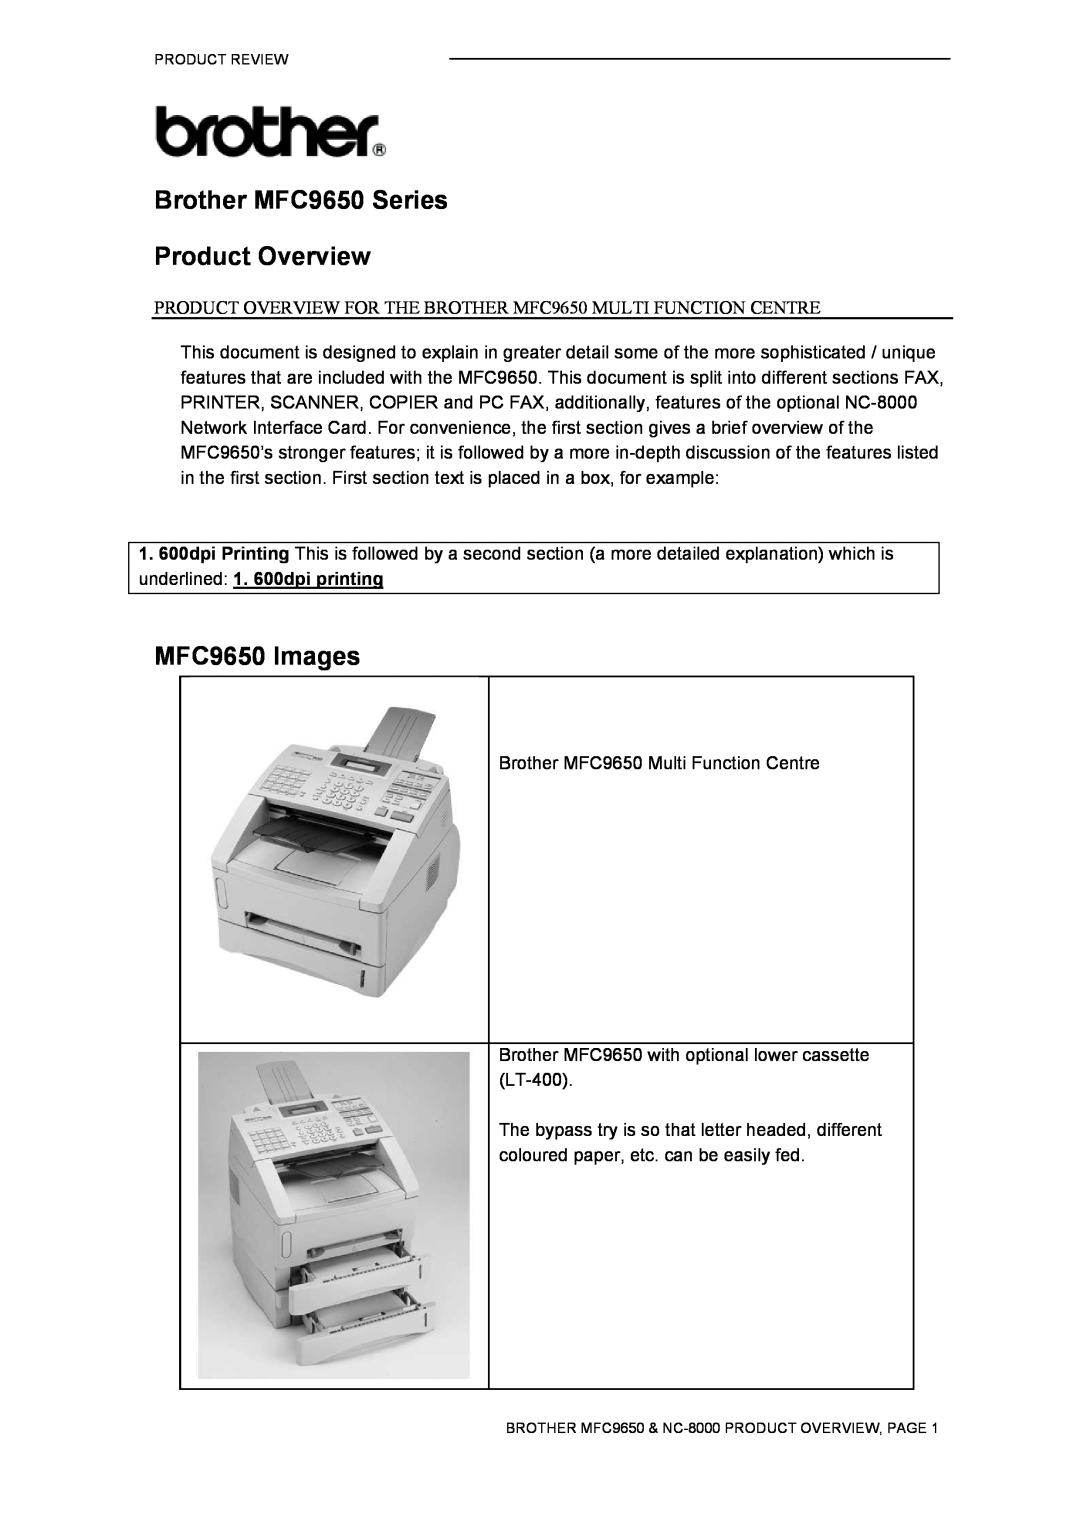 Brother manual Brother MFC9650 Series Product Overview, MFC9650 Images 